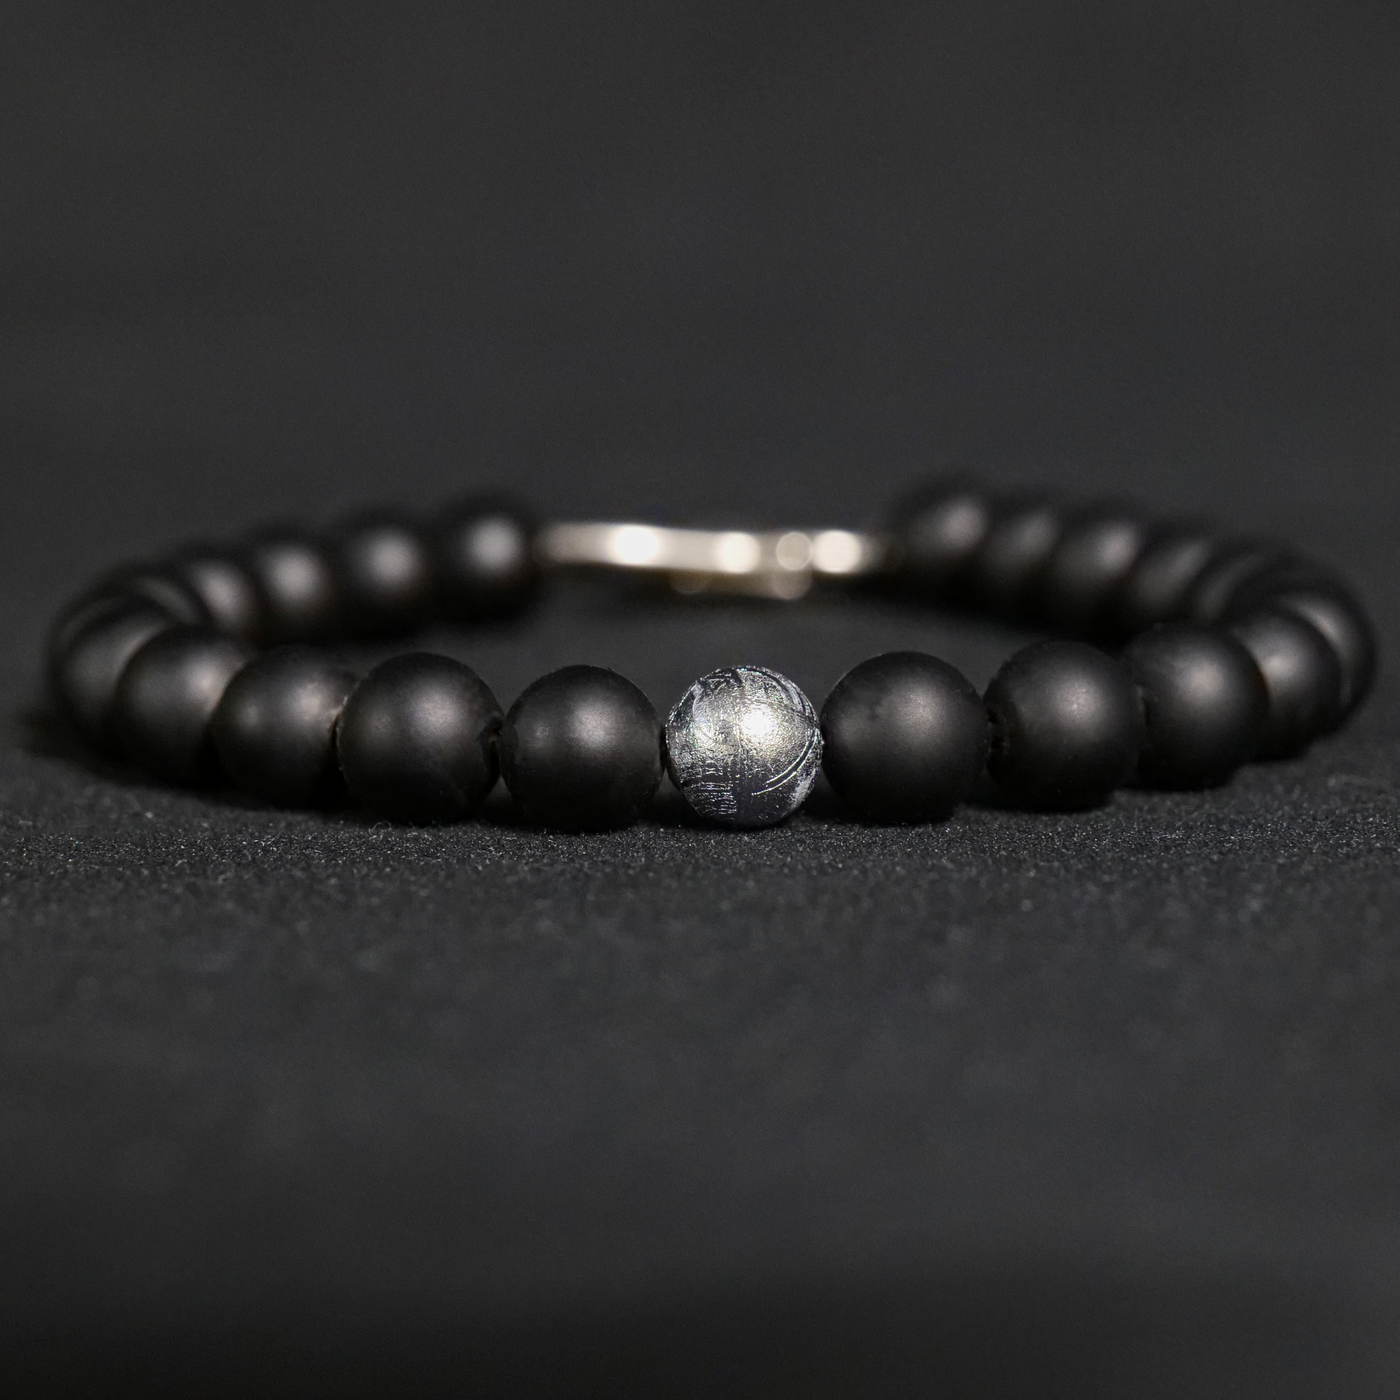 Men's Black Onyx Beaded Bracelet with Sterling Silver Clasp